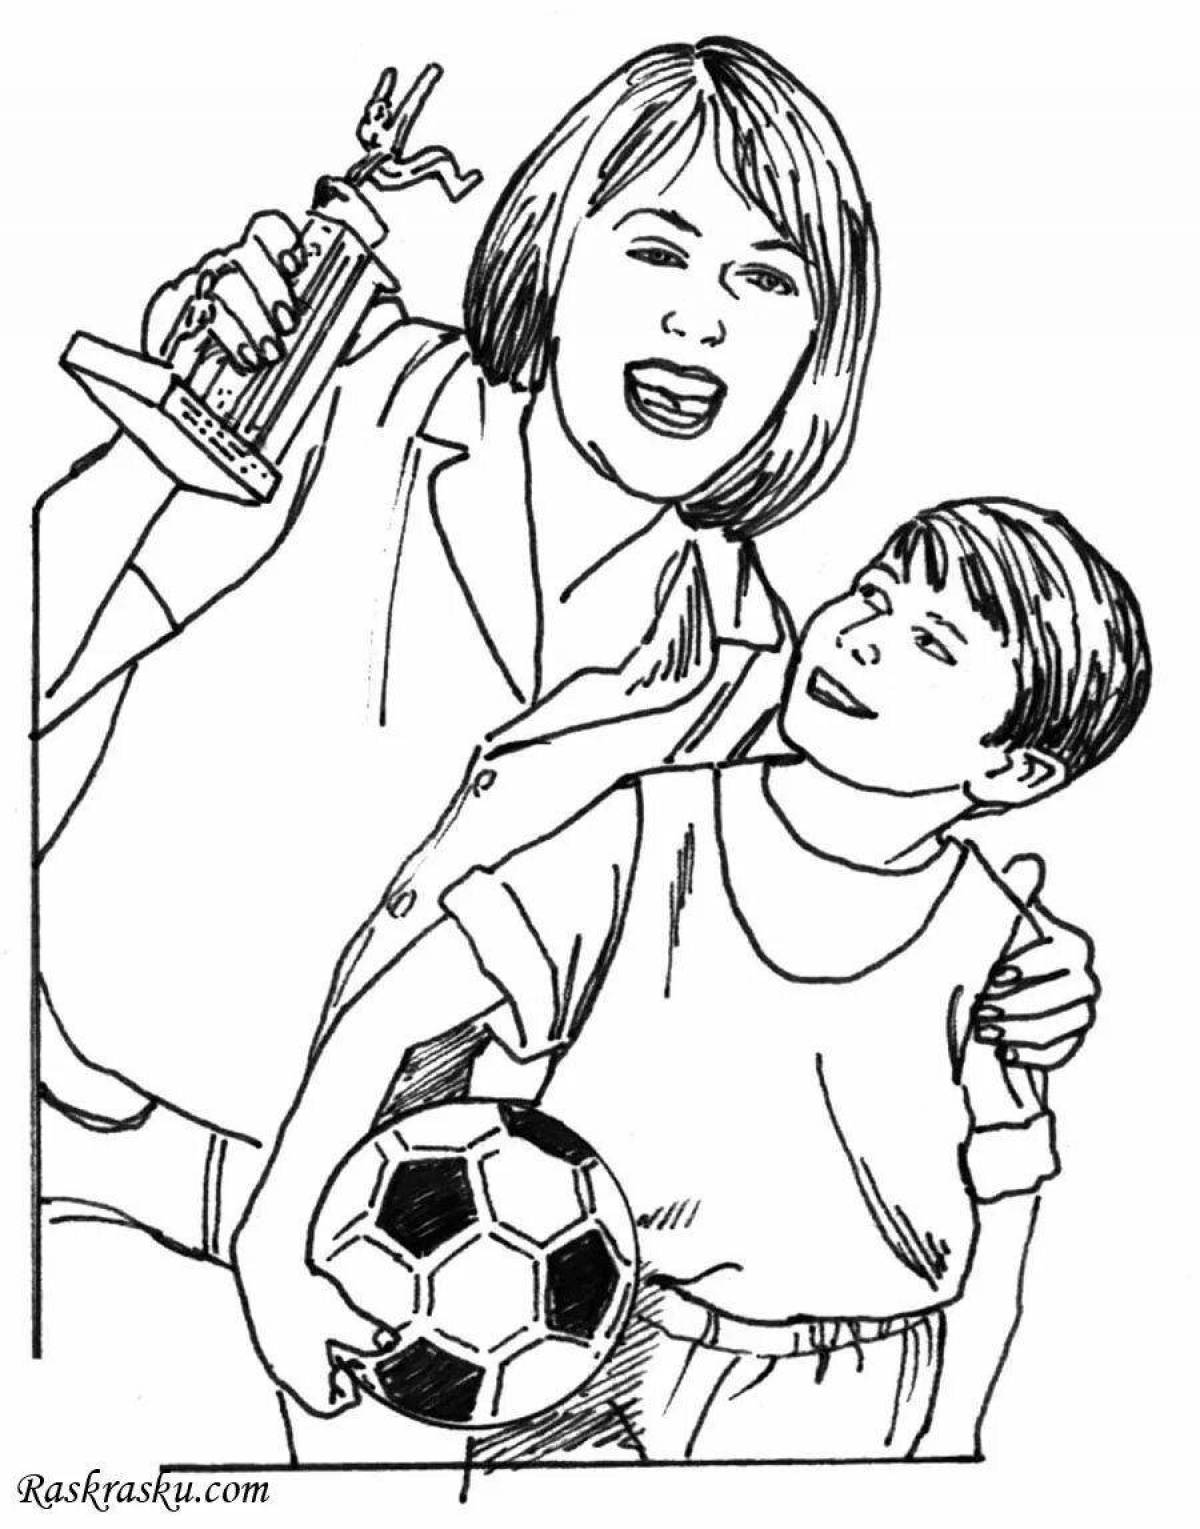 Active sports family coloring book